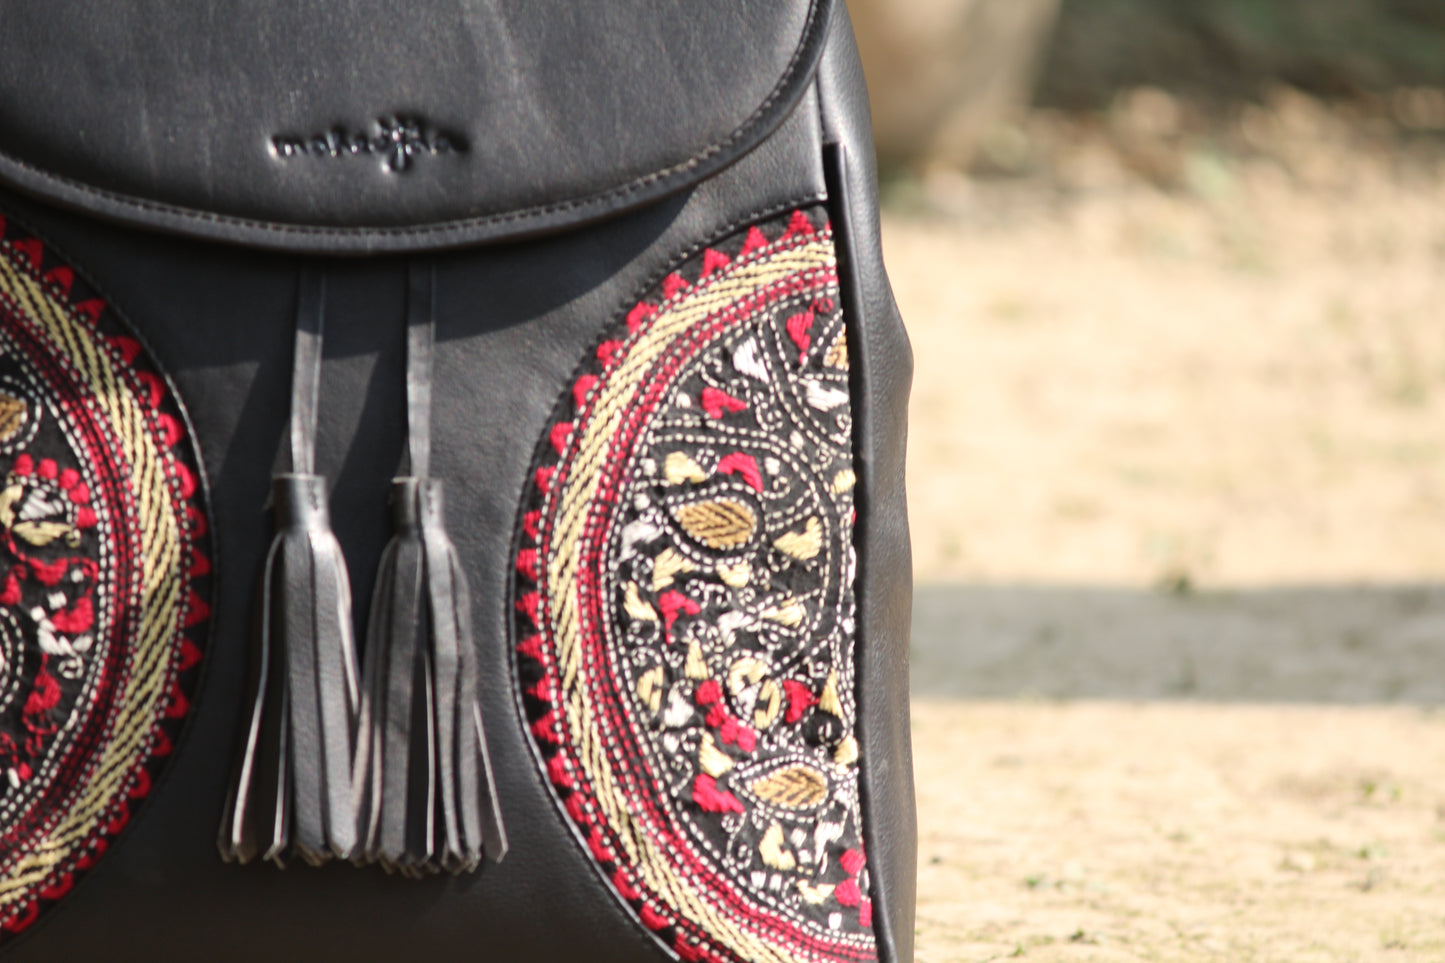 Leather Embroidery Semi-Chakras Backpack - Soft Black